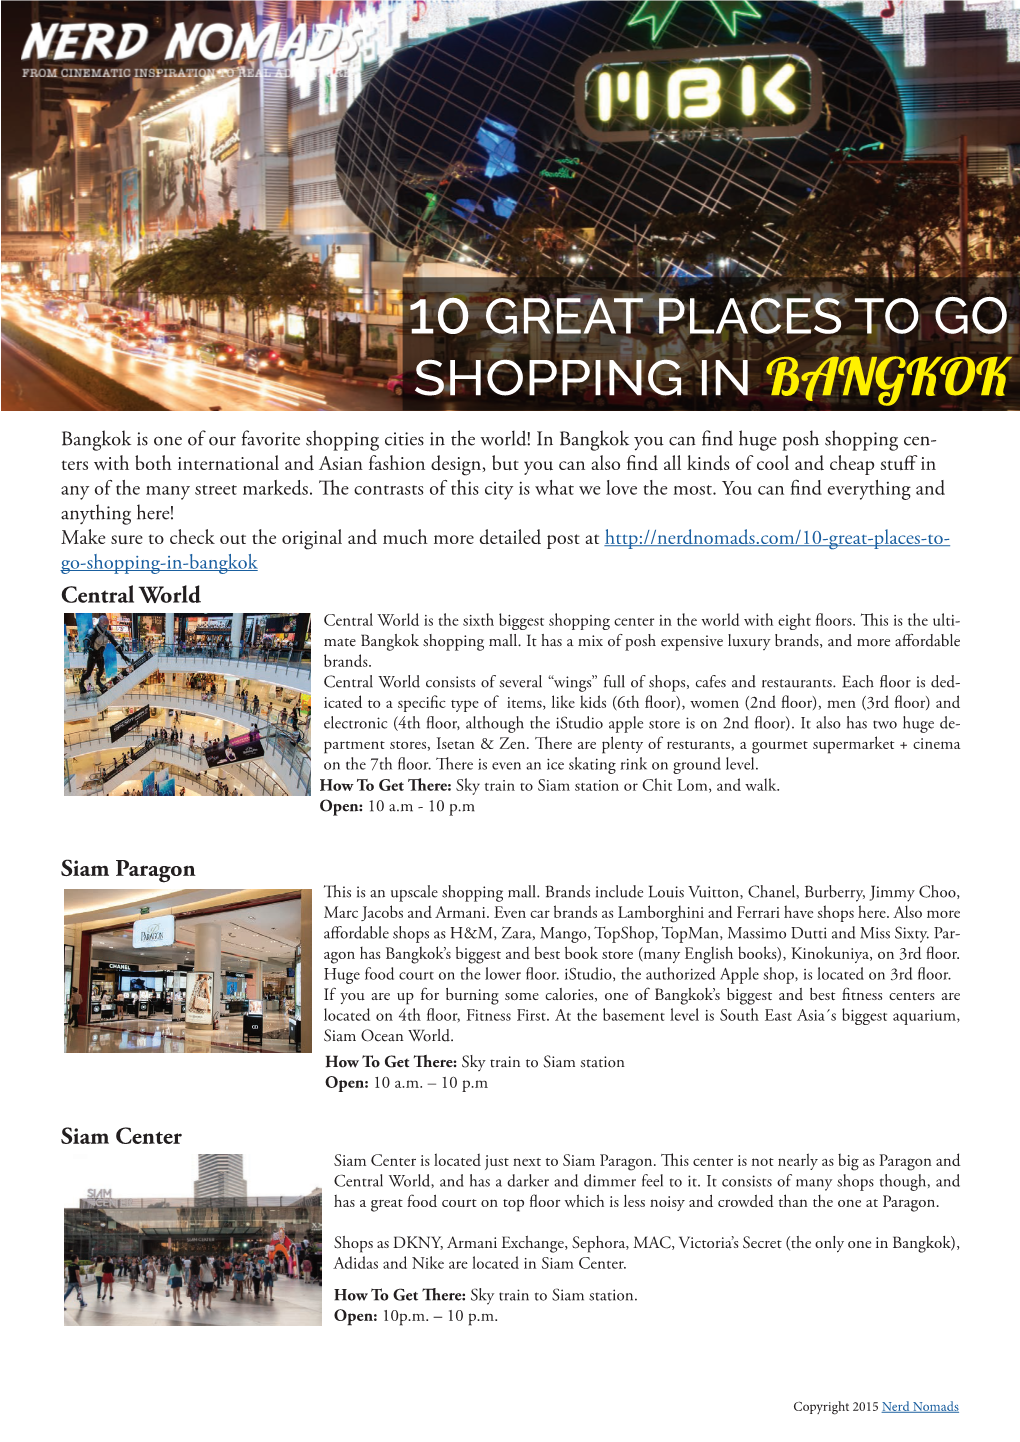 10 Great Places to Go Shopping in Bangkok